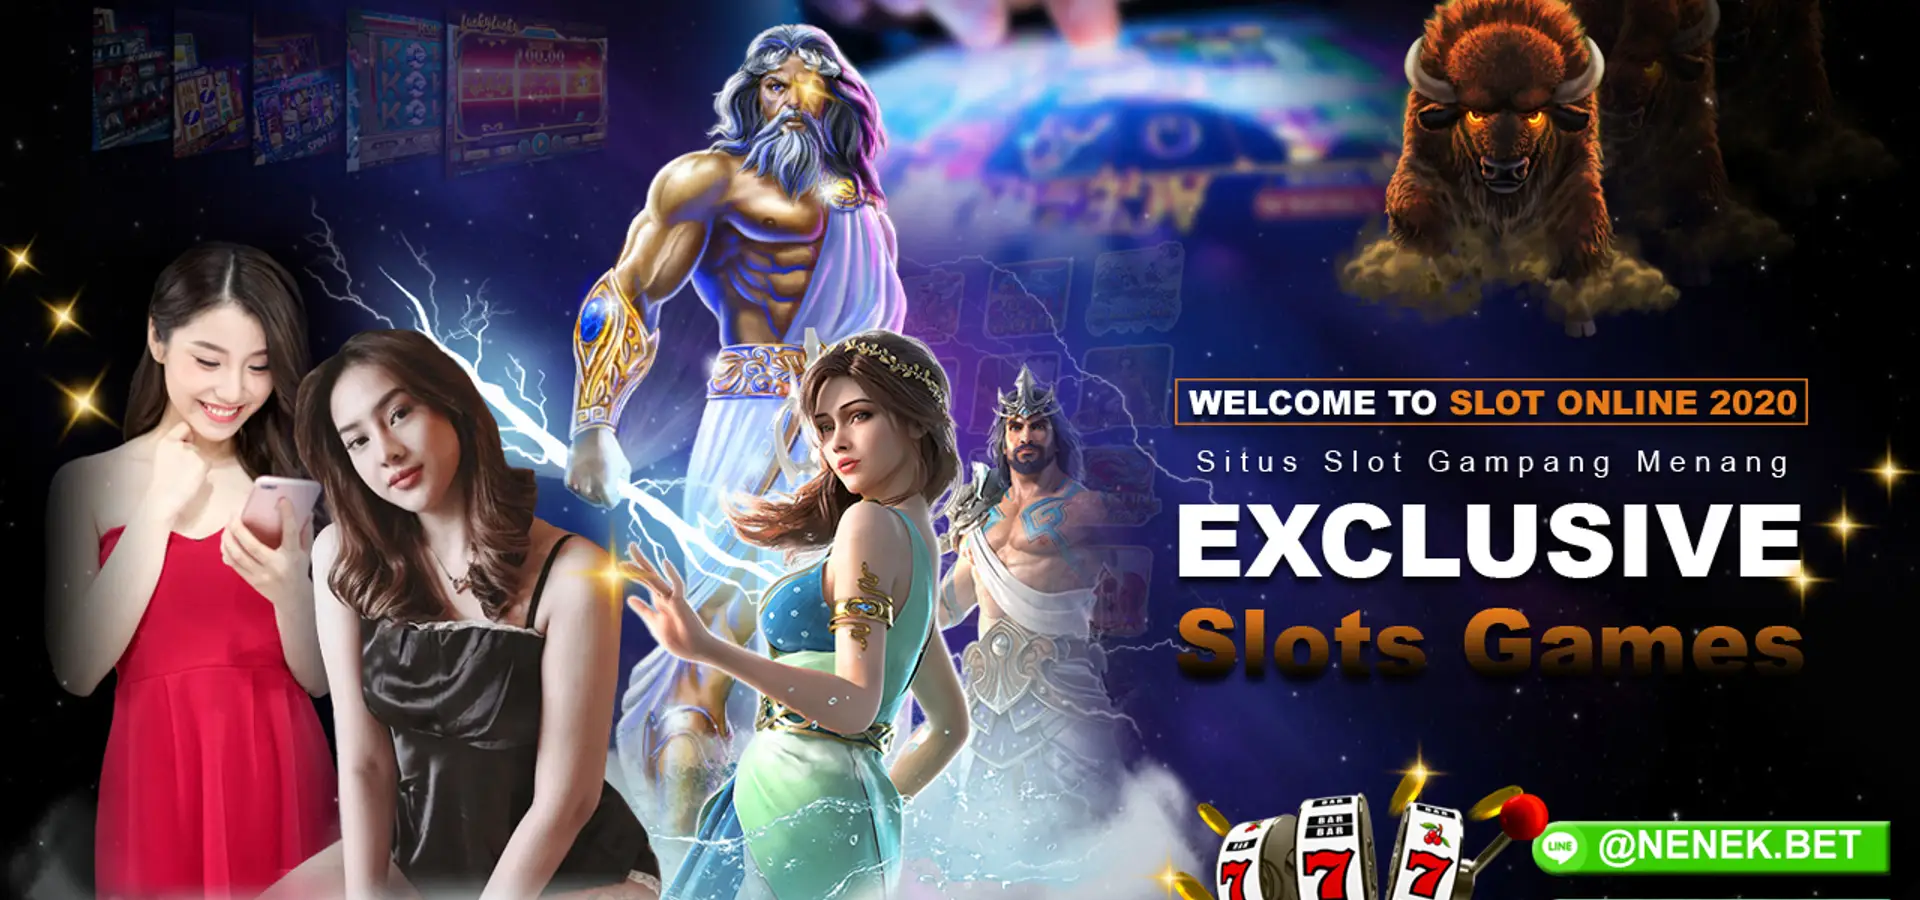 Experience the Magic: Ladang78’s Ultimate Online Slot Destination